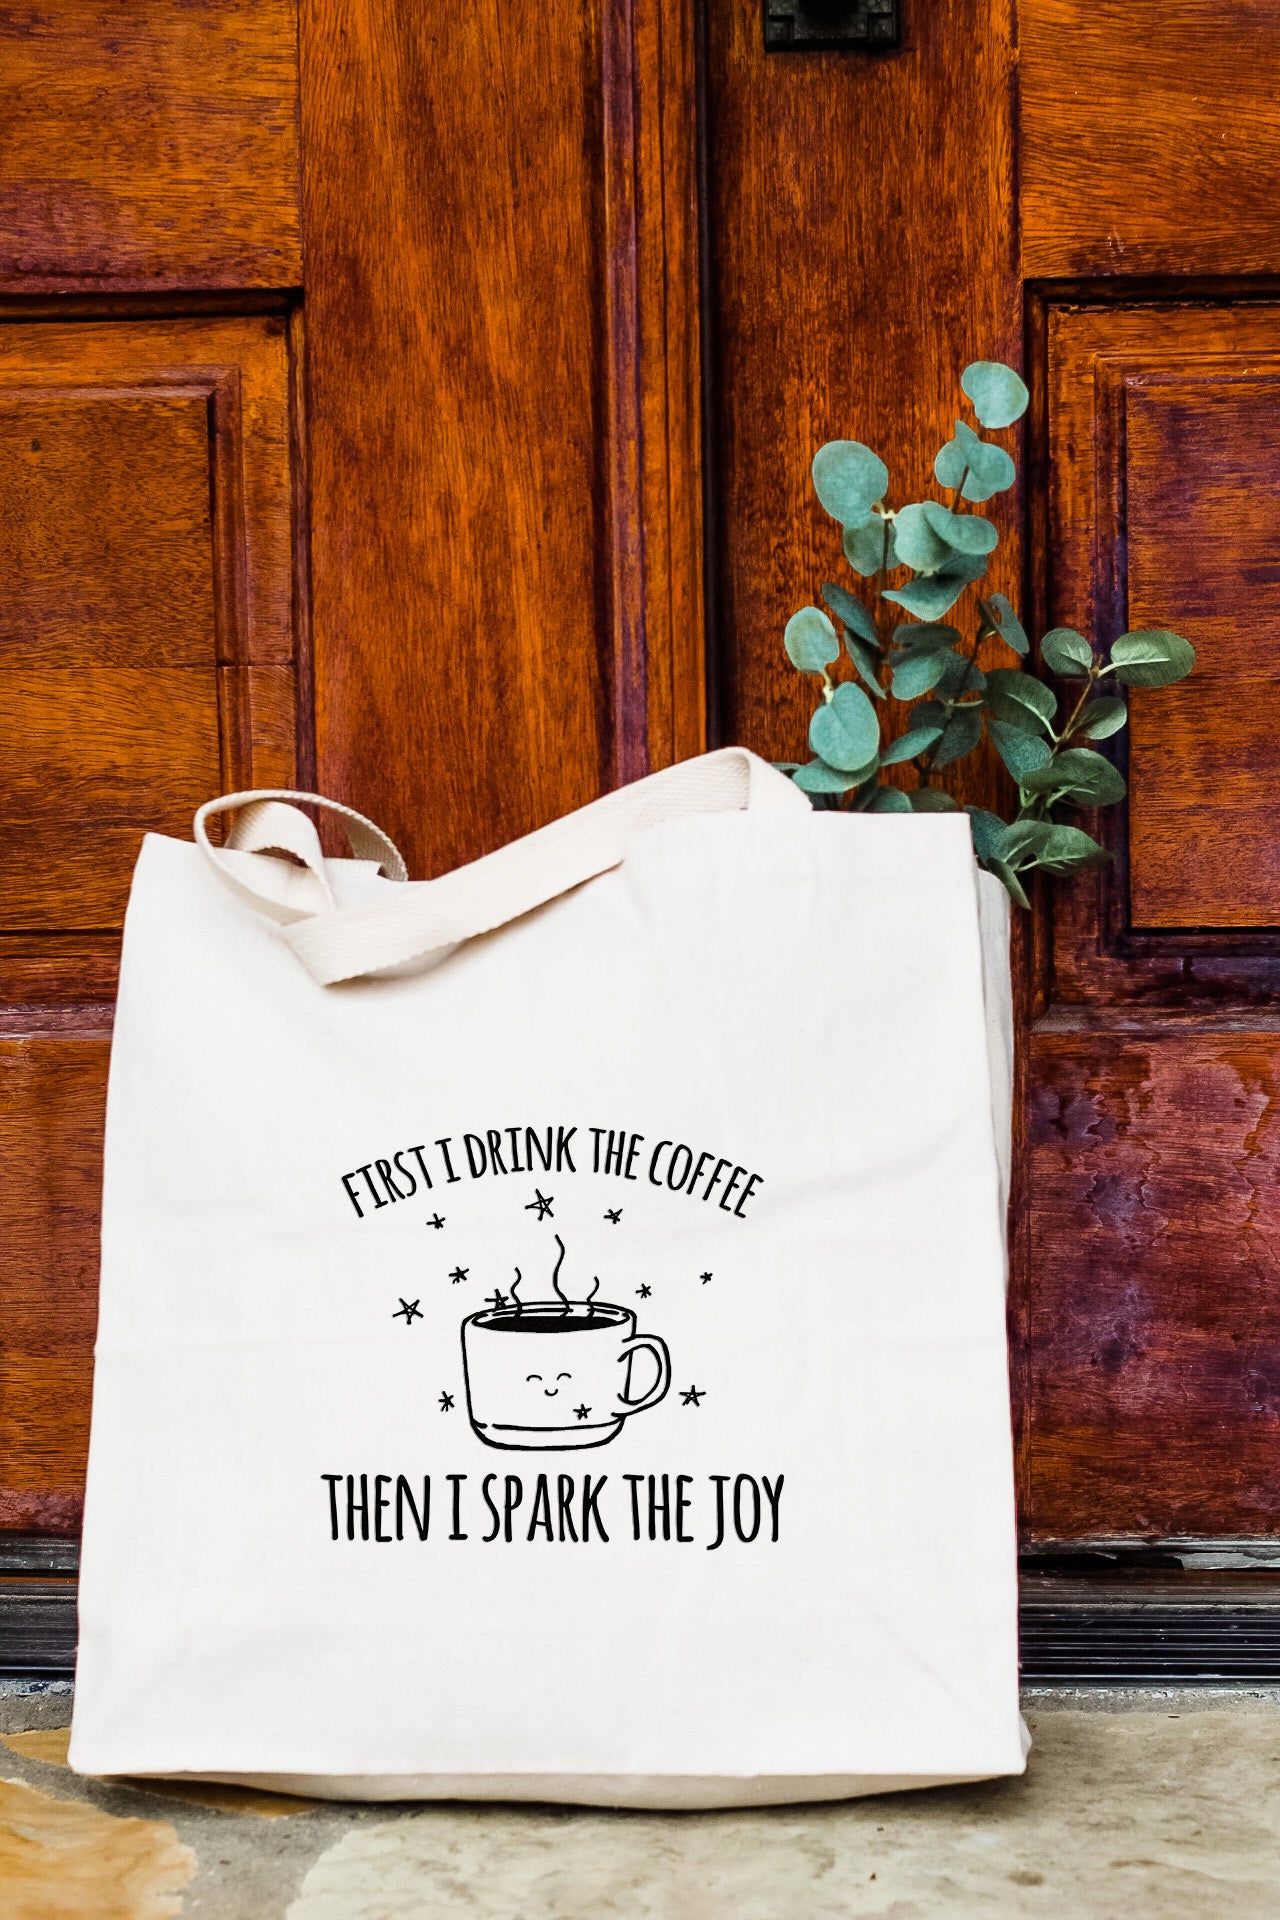 First I Drink the Coffee Then I Spark the Joy - Tote Bag - MoonlightMakers